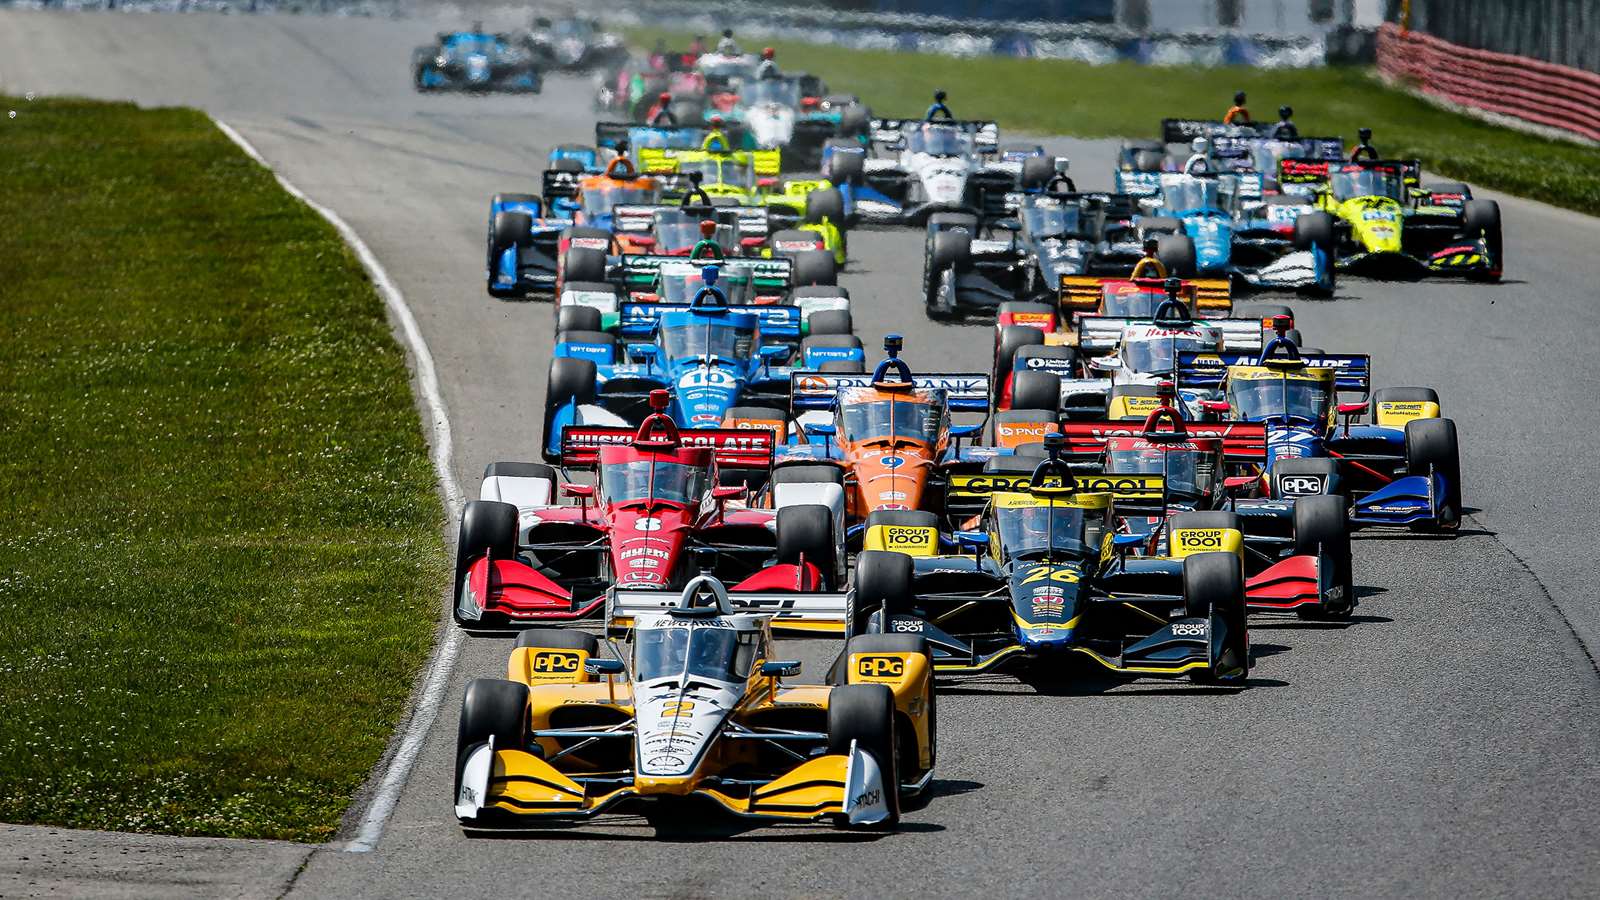 Indy Car 2022 Schedule 2022 Indycar Calendar And Standings | Grr